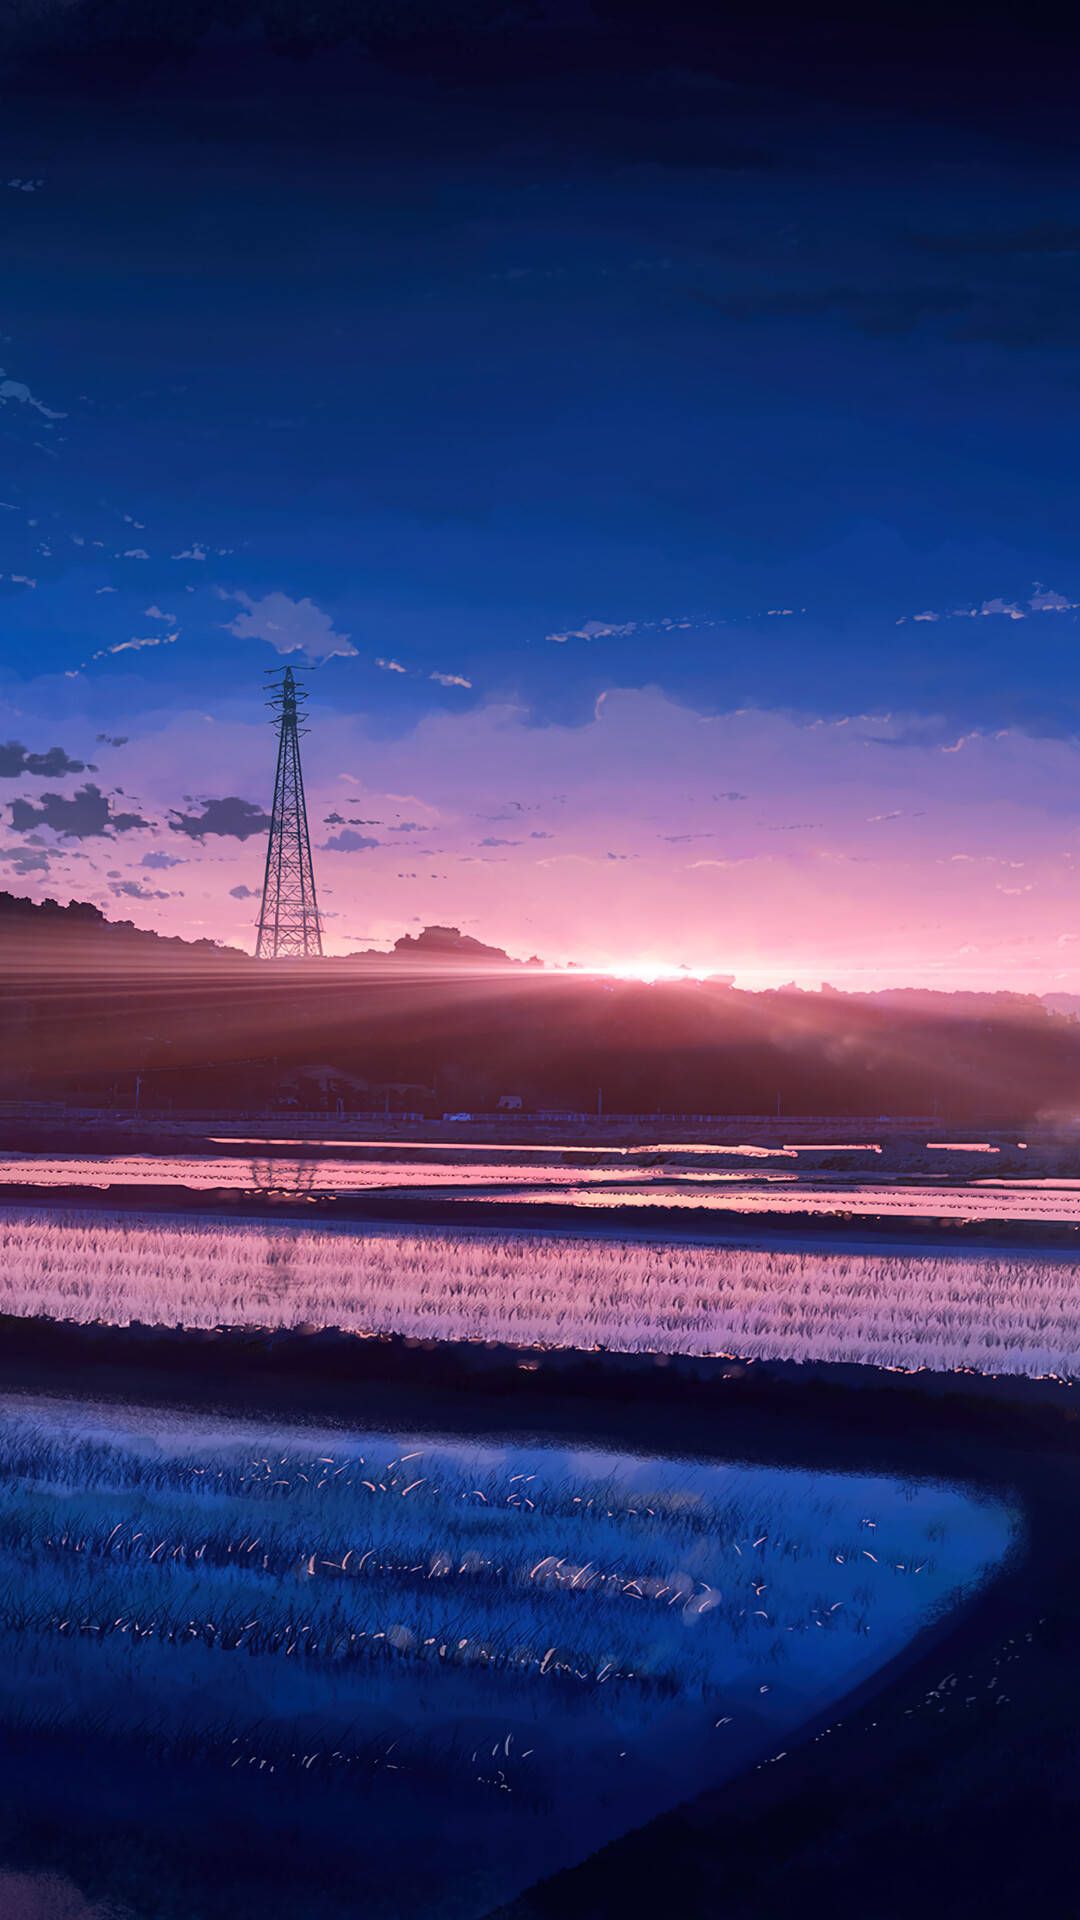 Aesthetic anime landscape wallpaper for mobiles and tablets. - Japanese